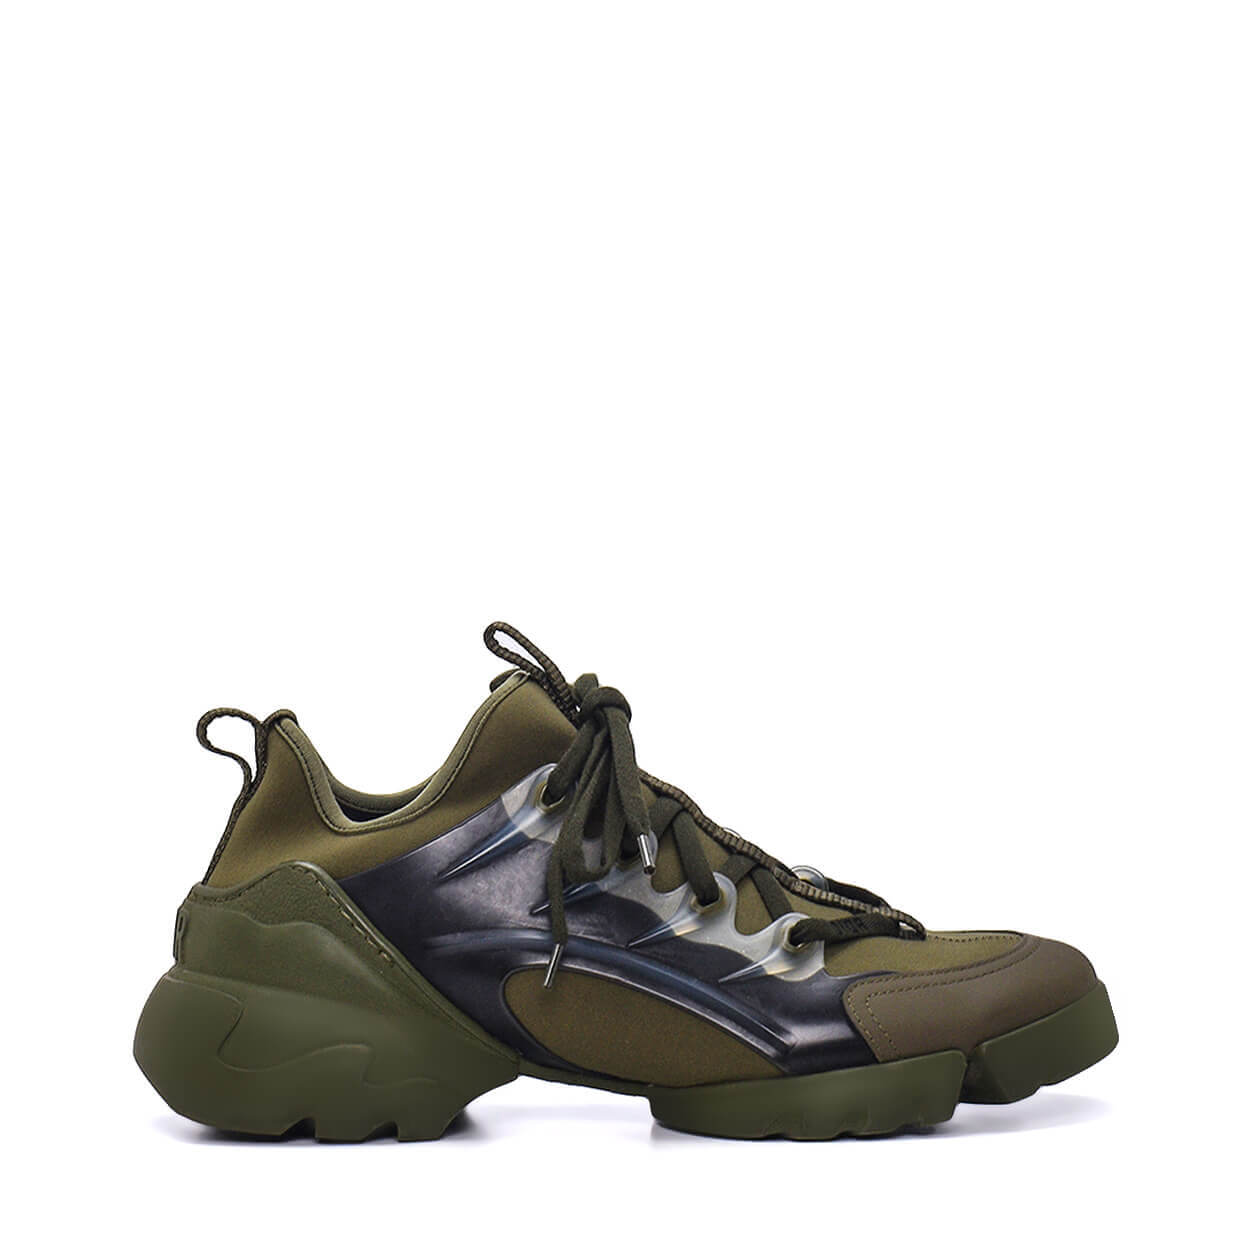 Christian Dior - Khaki Technical Fabric & Rubber D Connect Sneakers